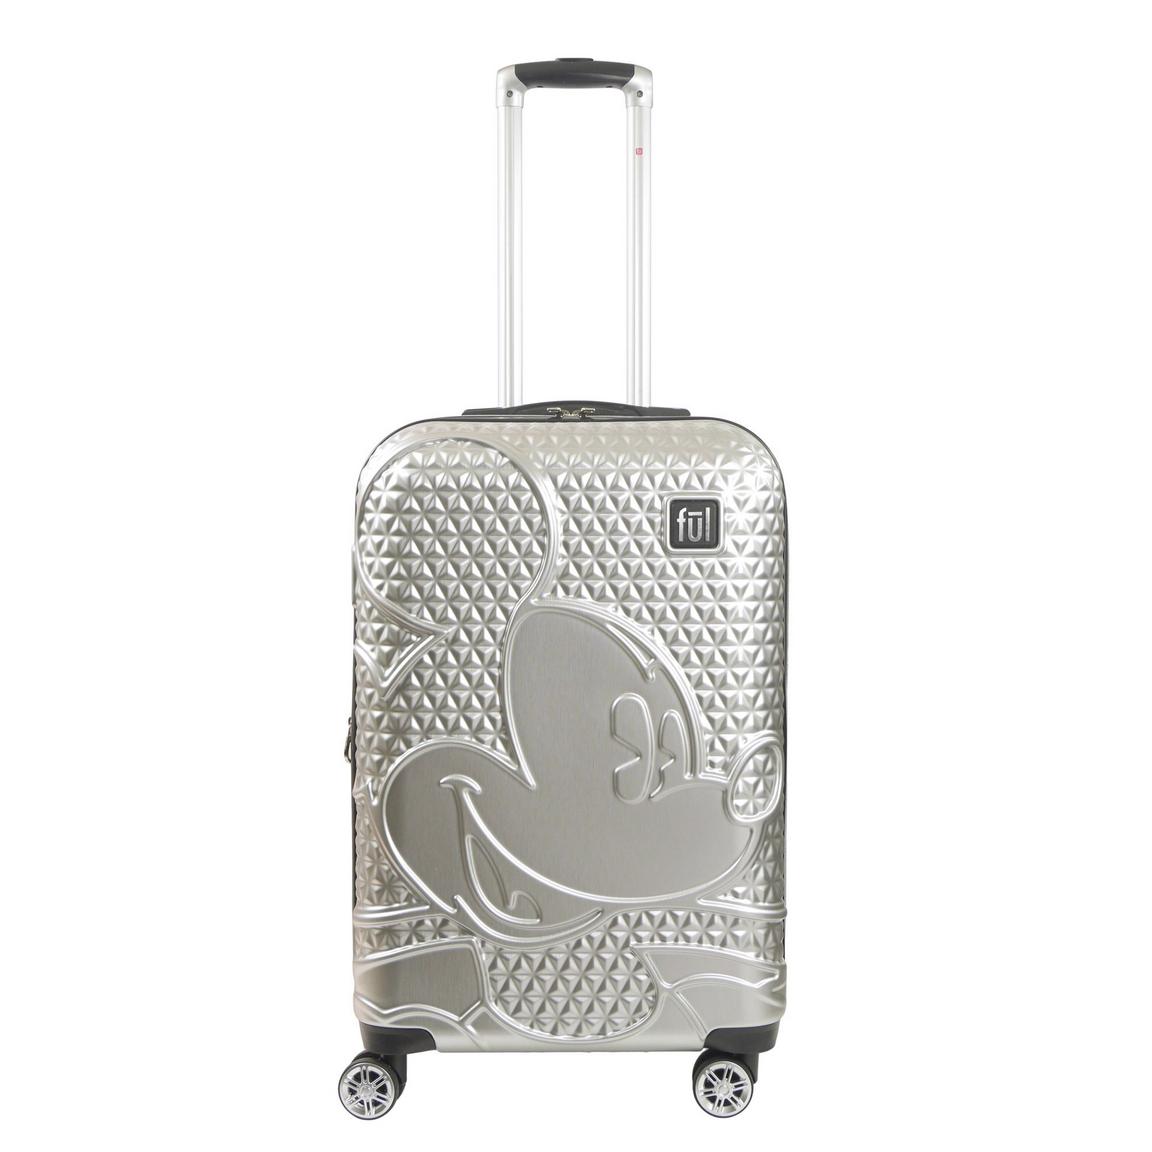 Concept One Disney FUL Mickey Mouse Textured 26-in Hard-Sided Roller Luggage - Silver